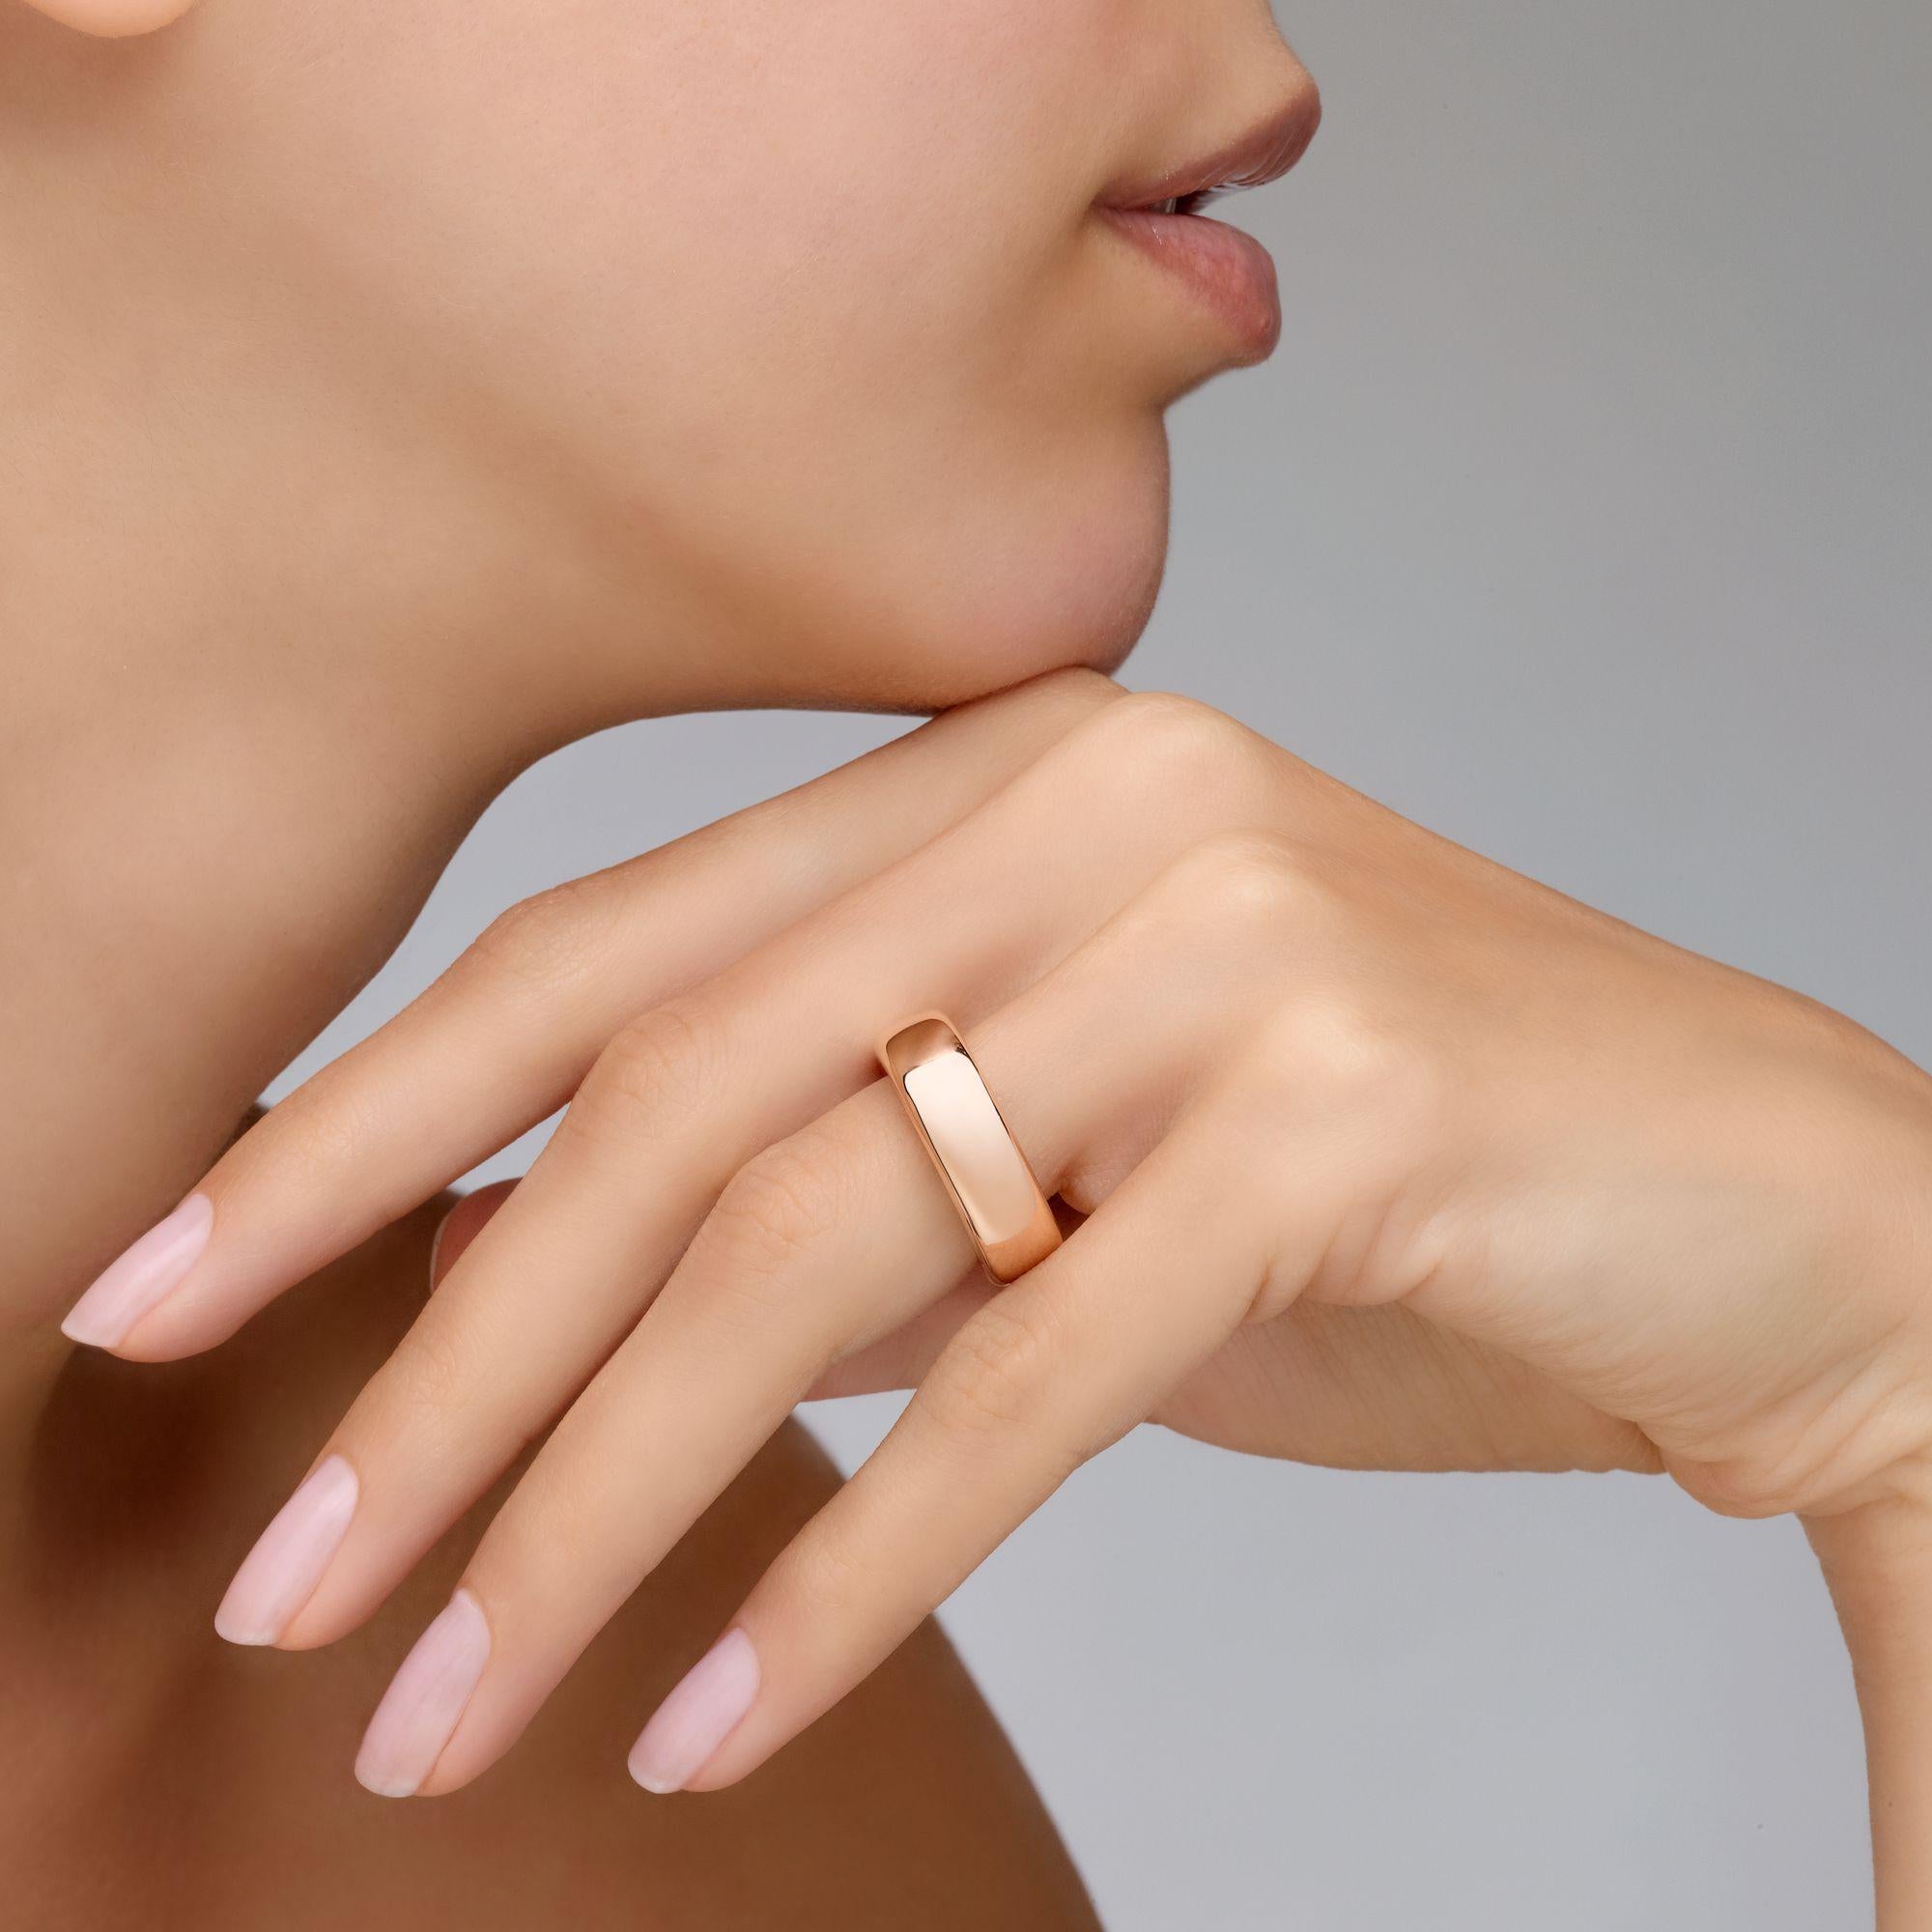 Honoring Pomellato’s goldsmith heritage, ICONICA shines in bold rings of sensual rose gold. Daring, lightweight and stackable, this anniversary collection may be mixed-and-matched per the Pomellato spirit. Discover more on 2018 Kering Foundation’s